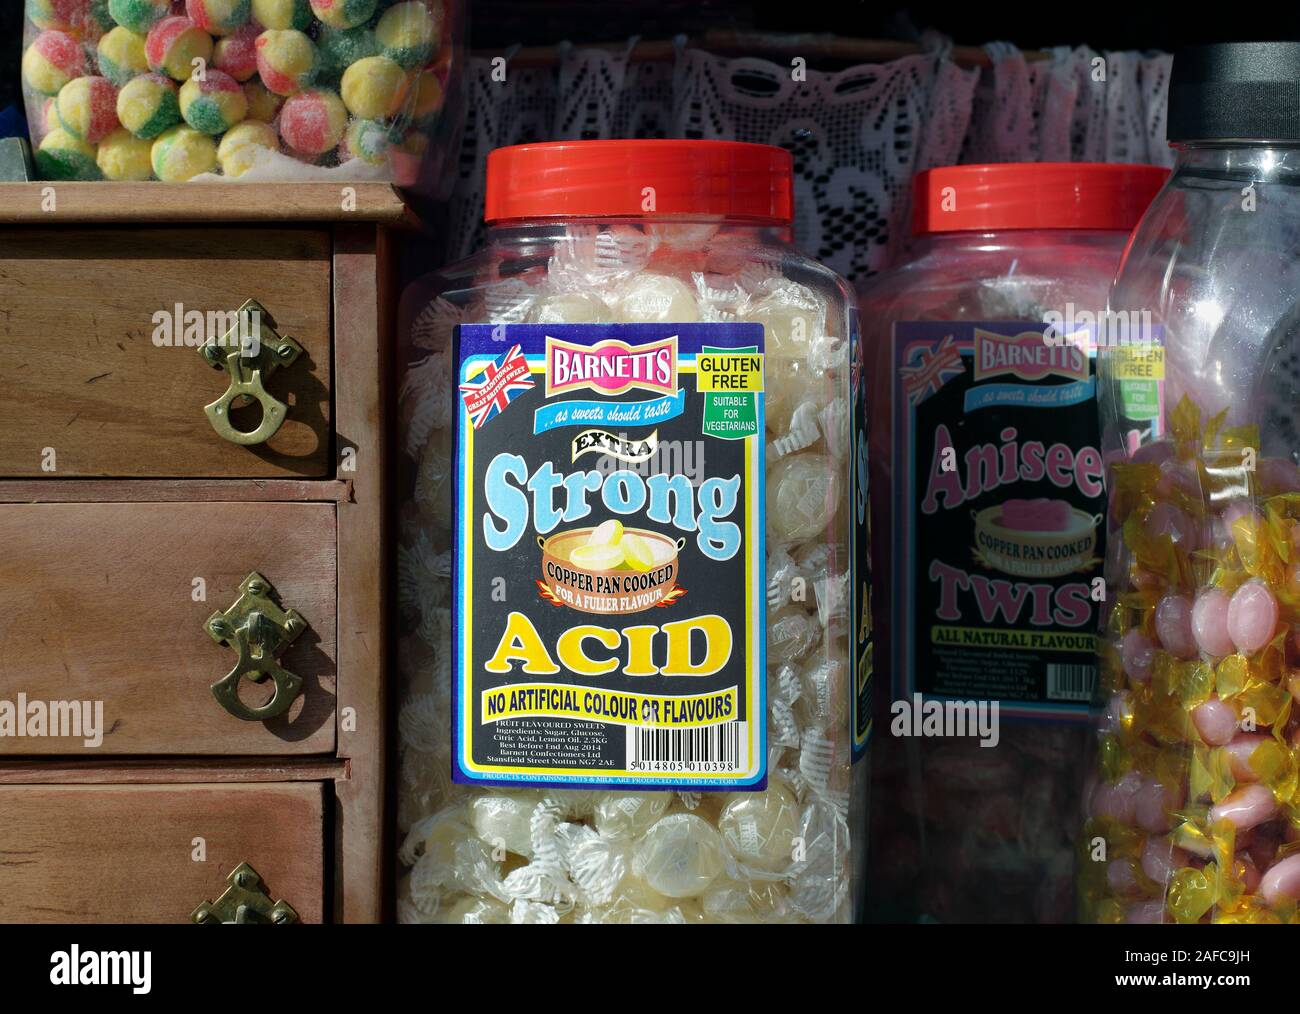 Sweets jars in a shop window, including 'Extra strong acid'. Stock Photo